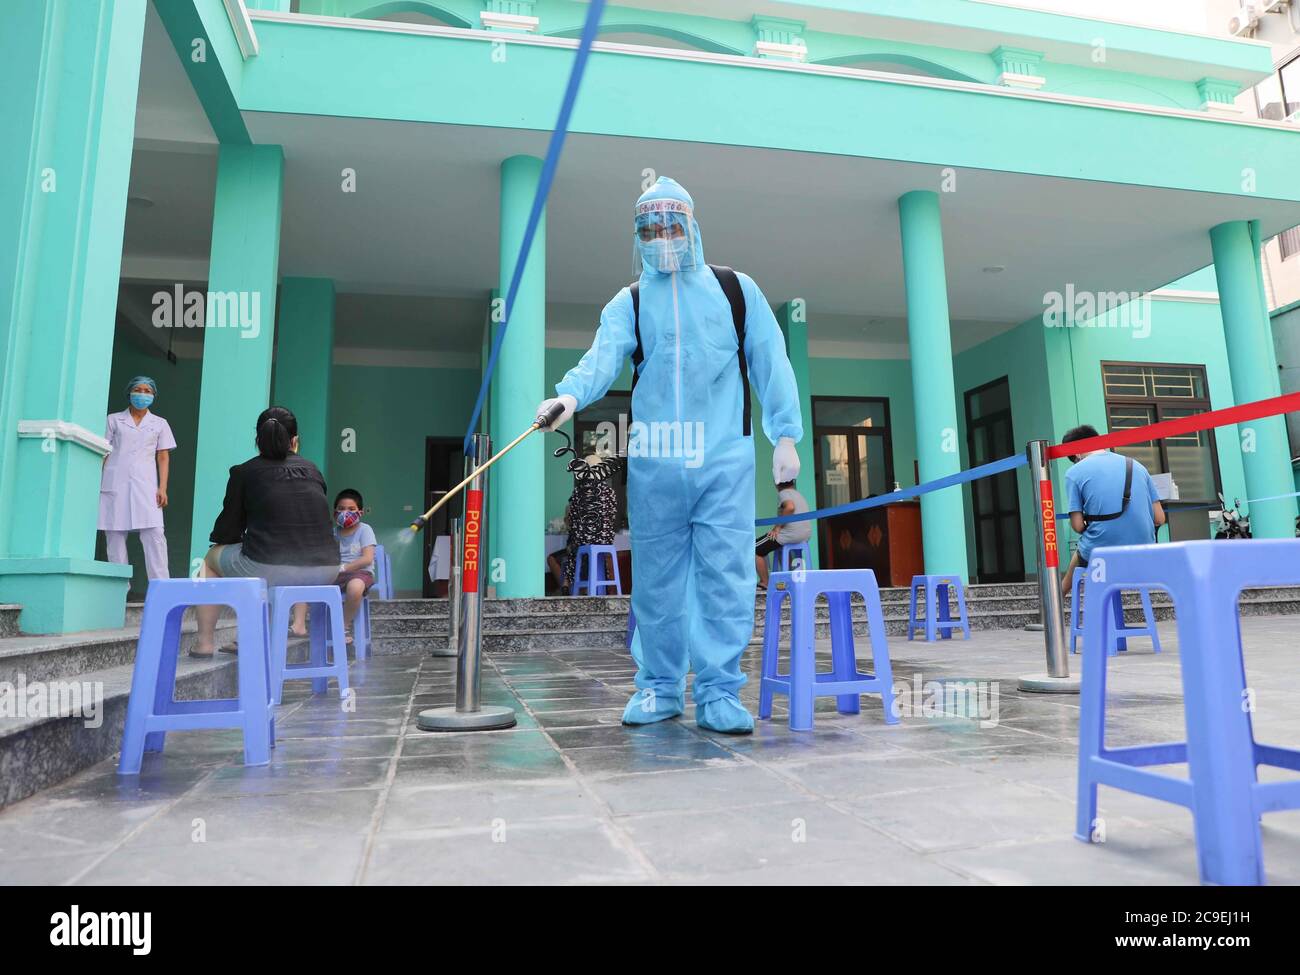 Hanoi, Vietnam. 30th July, 2020. A staff member disinfects at a health station in Hanoi, Vietnam, July 30, 2020. Vietnam recorded 45 new domestically transmitted COVID-19 cases on Friday morning, bringing its total confirmed cases to 509, according to its Ministry of Health. Credit: Handout By VNA/Xinhua/Alamy Live News Stock Photo